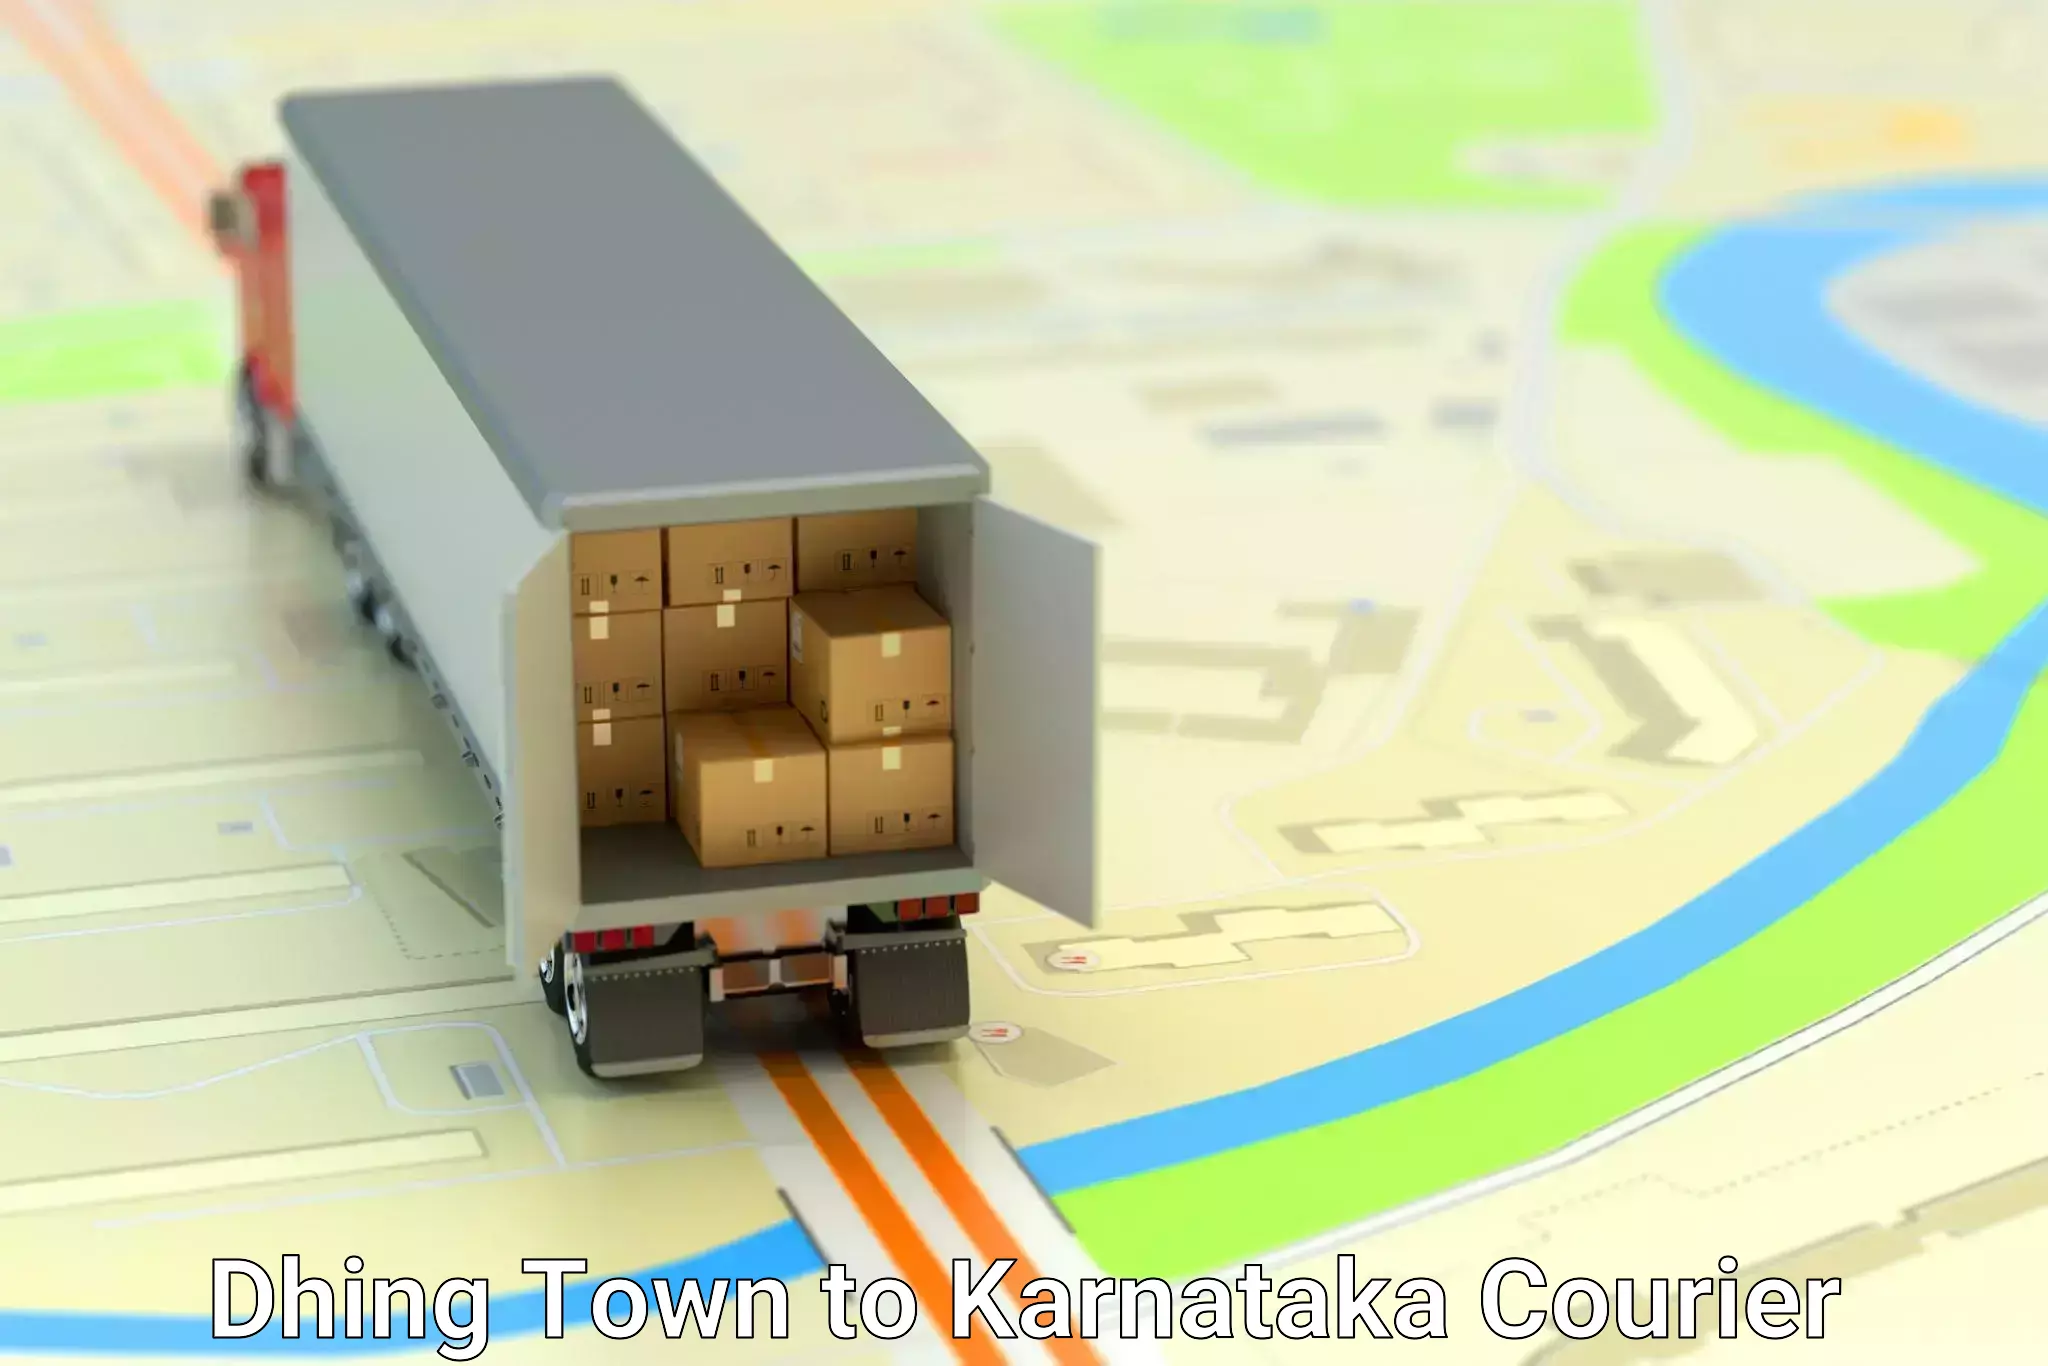 Express delivery capabilities Dhing Town to Karnataka